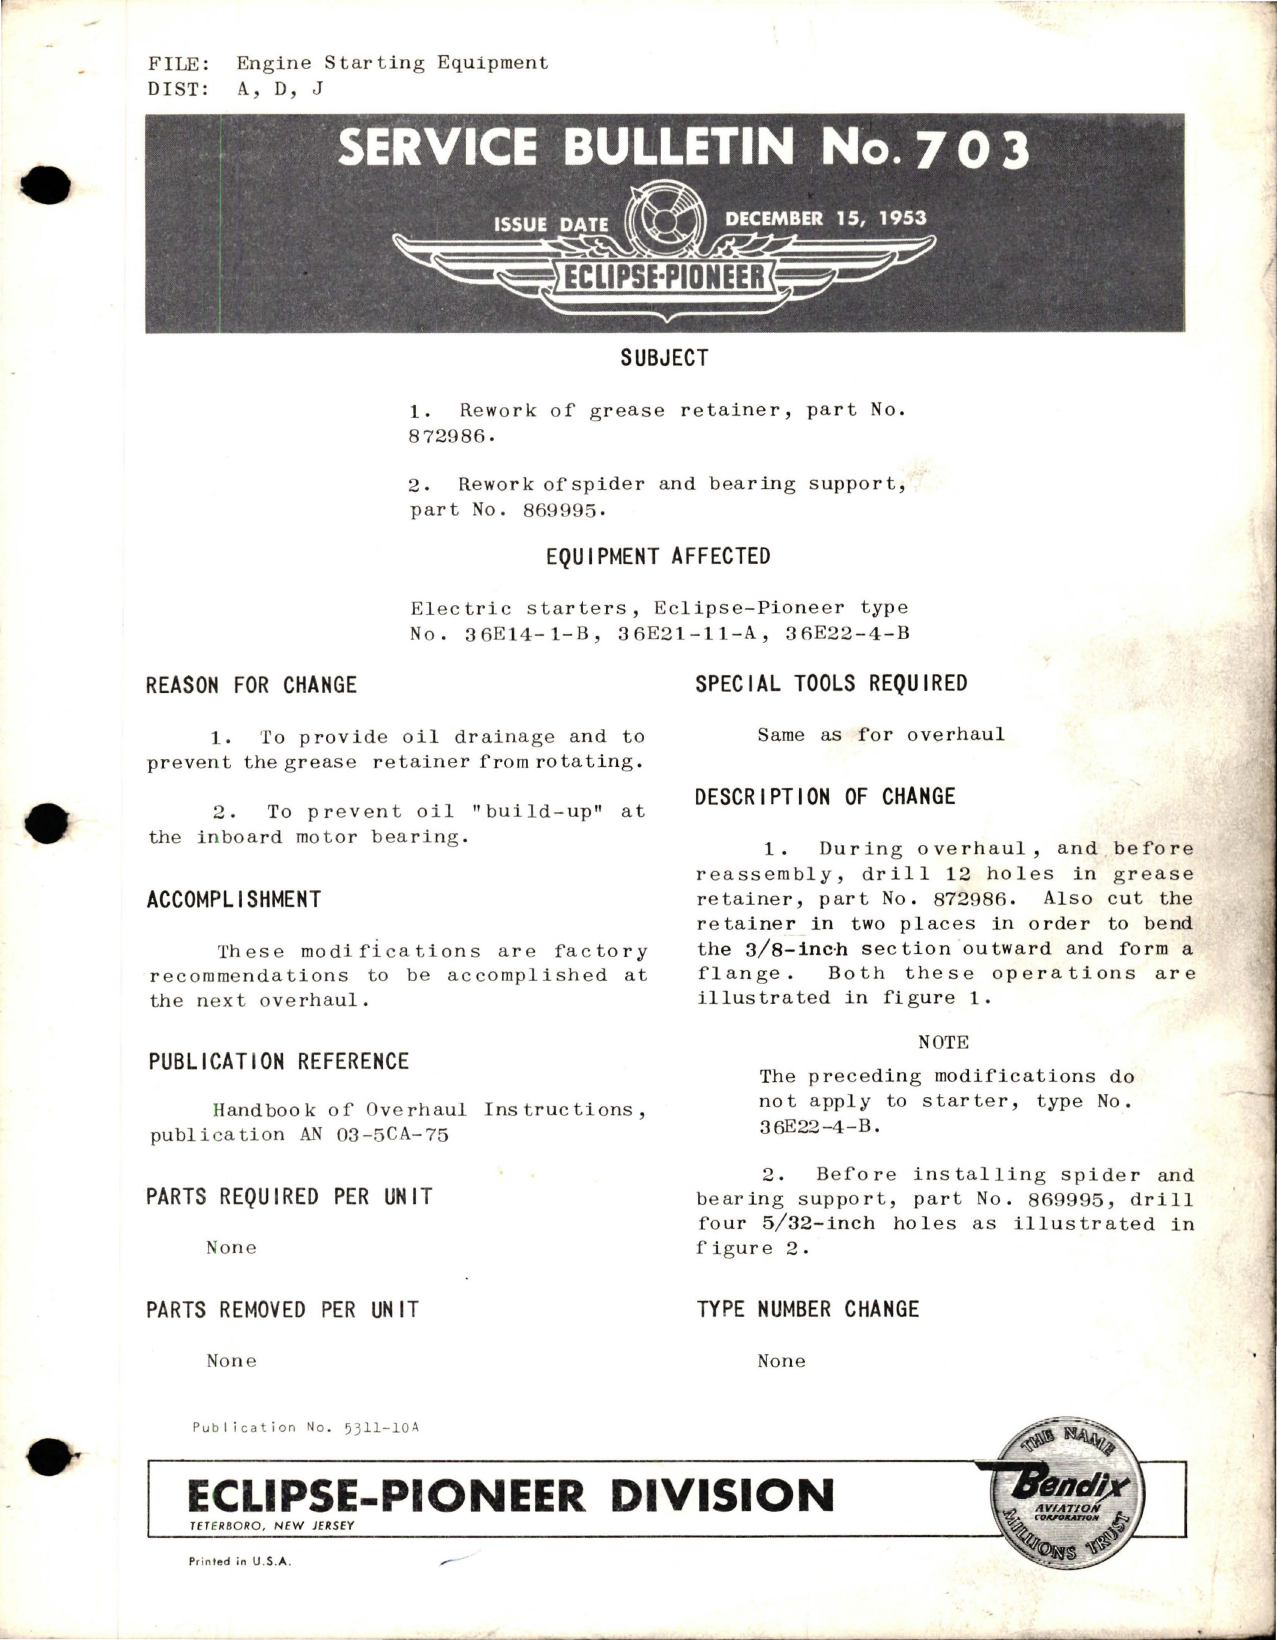 Sample page 1 from AirCorps Library document: Rework of Grease Retainer and Spider and Bearing Support - Parts 872986 and 869995